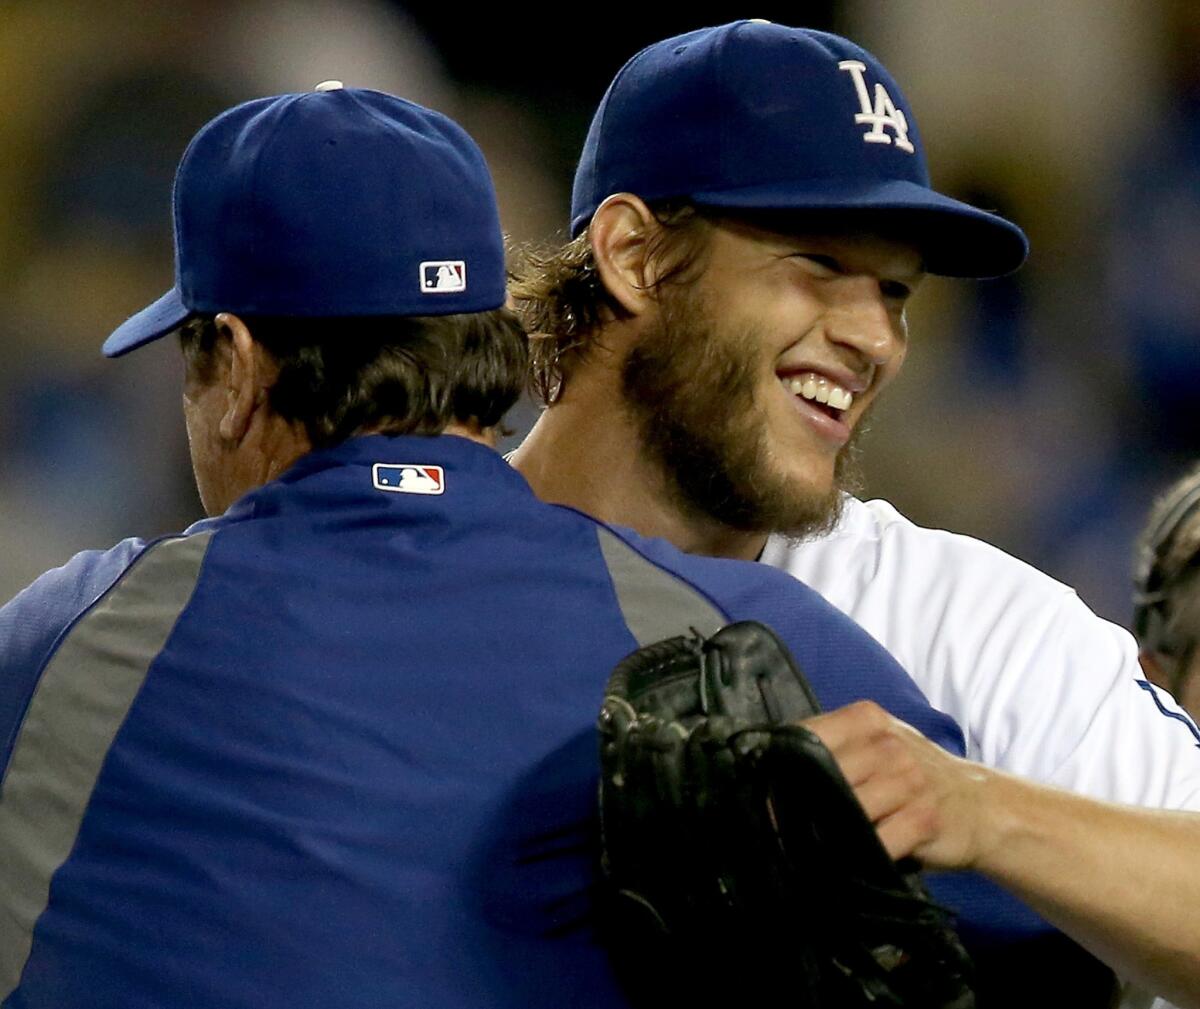 Clayton Kershaw's scoreless-inning streak ended at 41 after he gave up a home run to San Diego's Chase Headley, but he was beaming after his complete-game victory. Kershaw gave up just three hits while striking out 11.